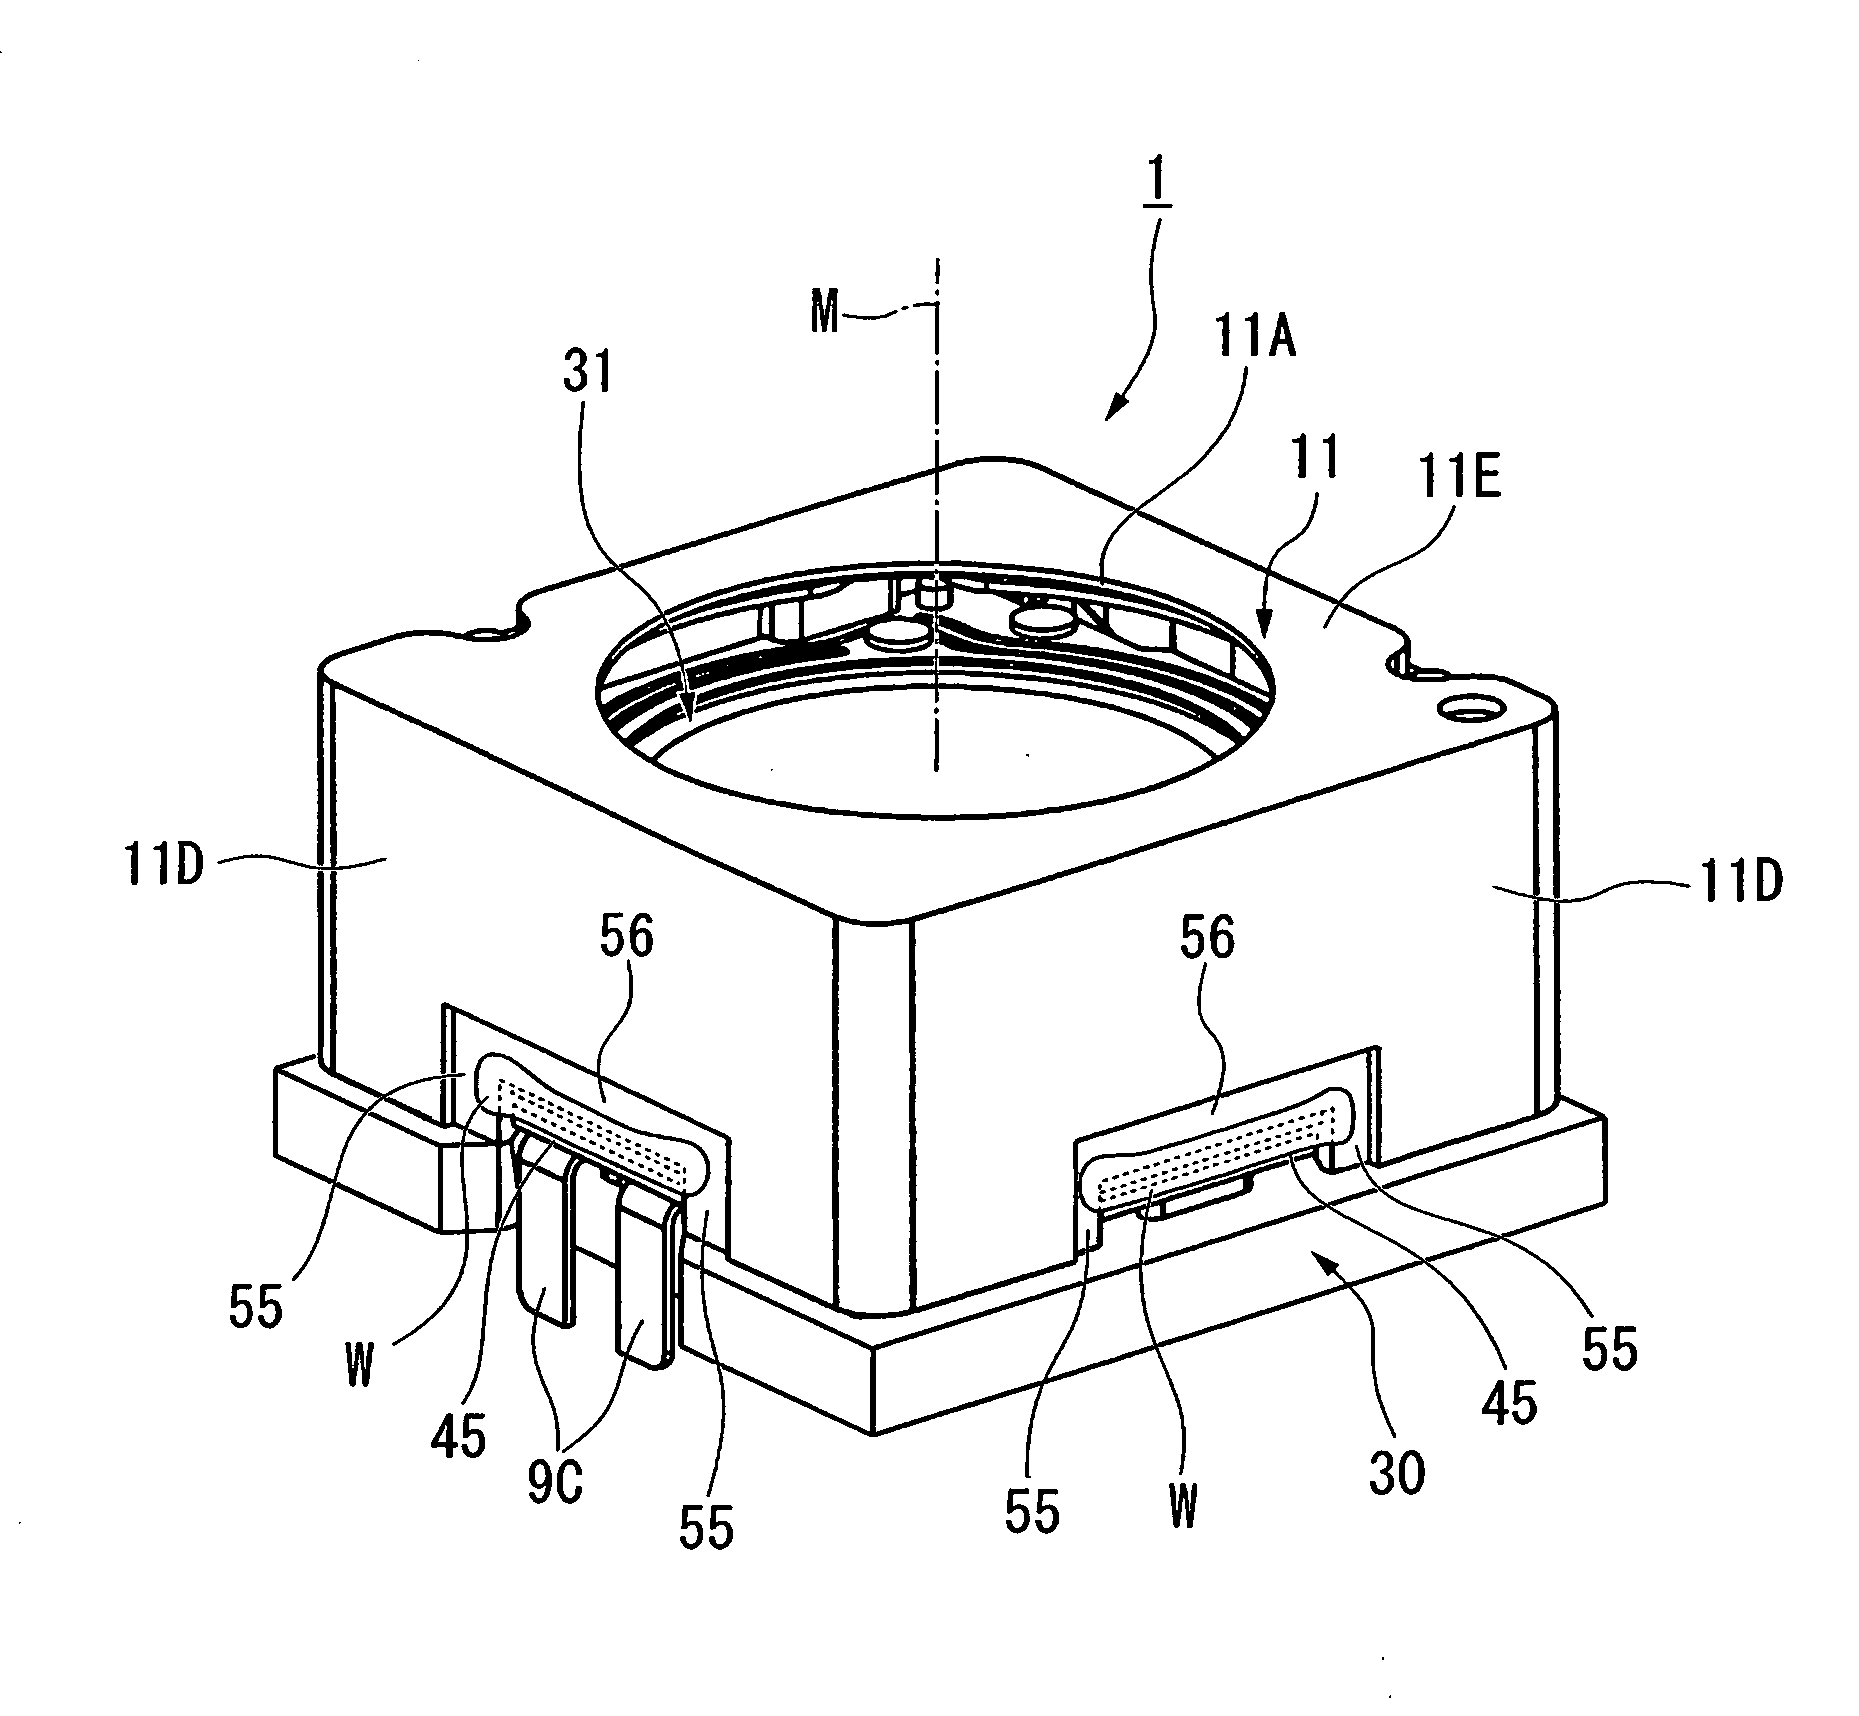 Driver module and electronic device